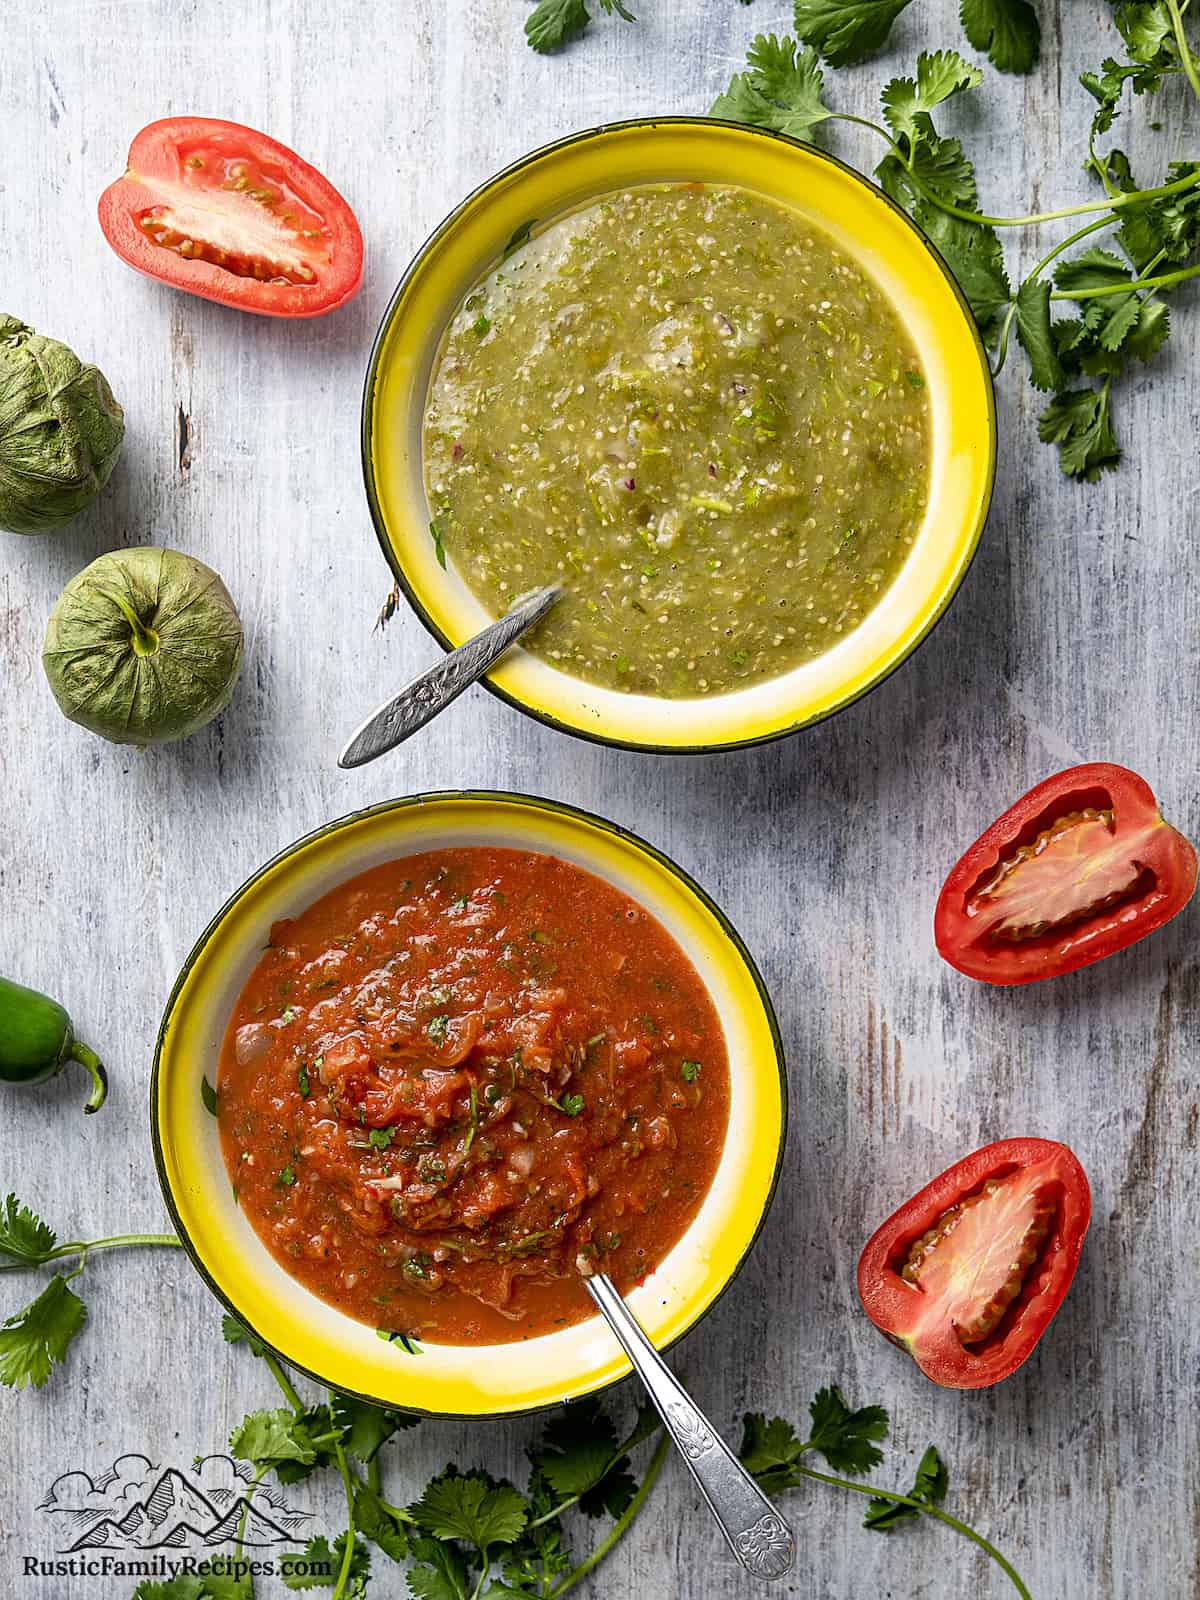 Bowls of green roasted tomatillo salsa and roasted red tomato salsa